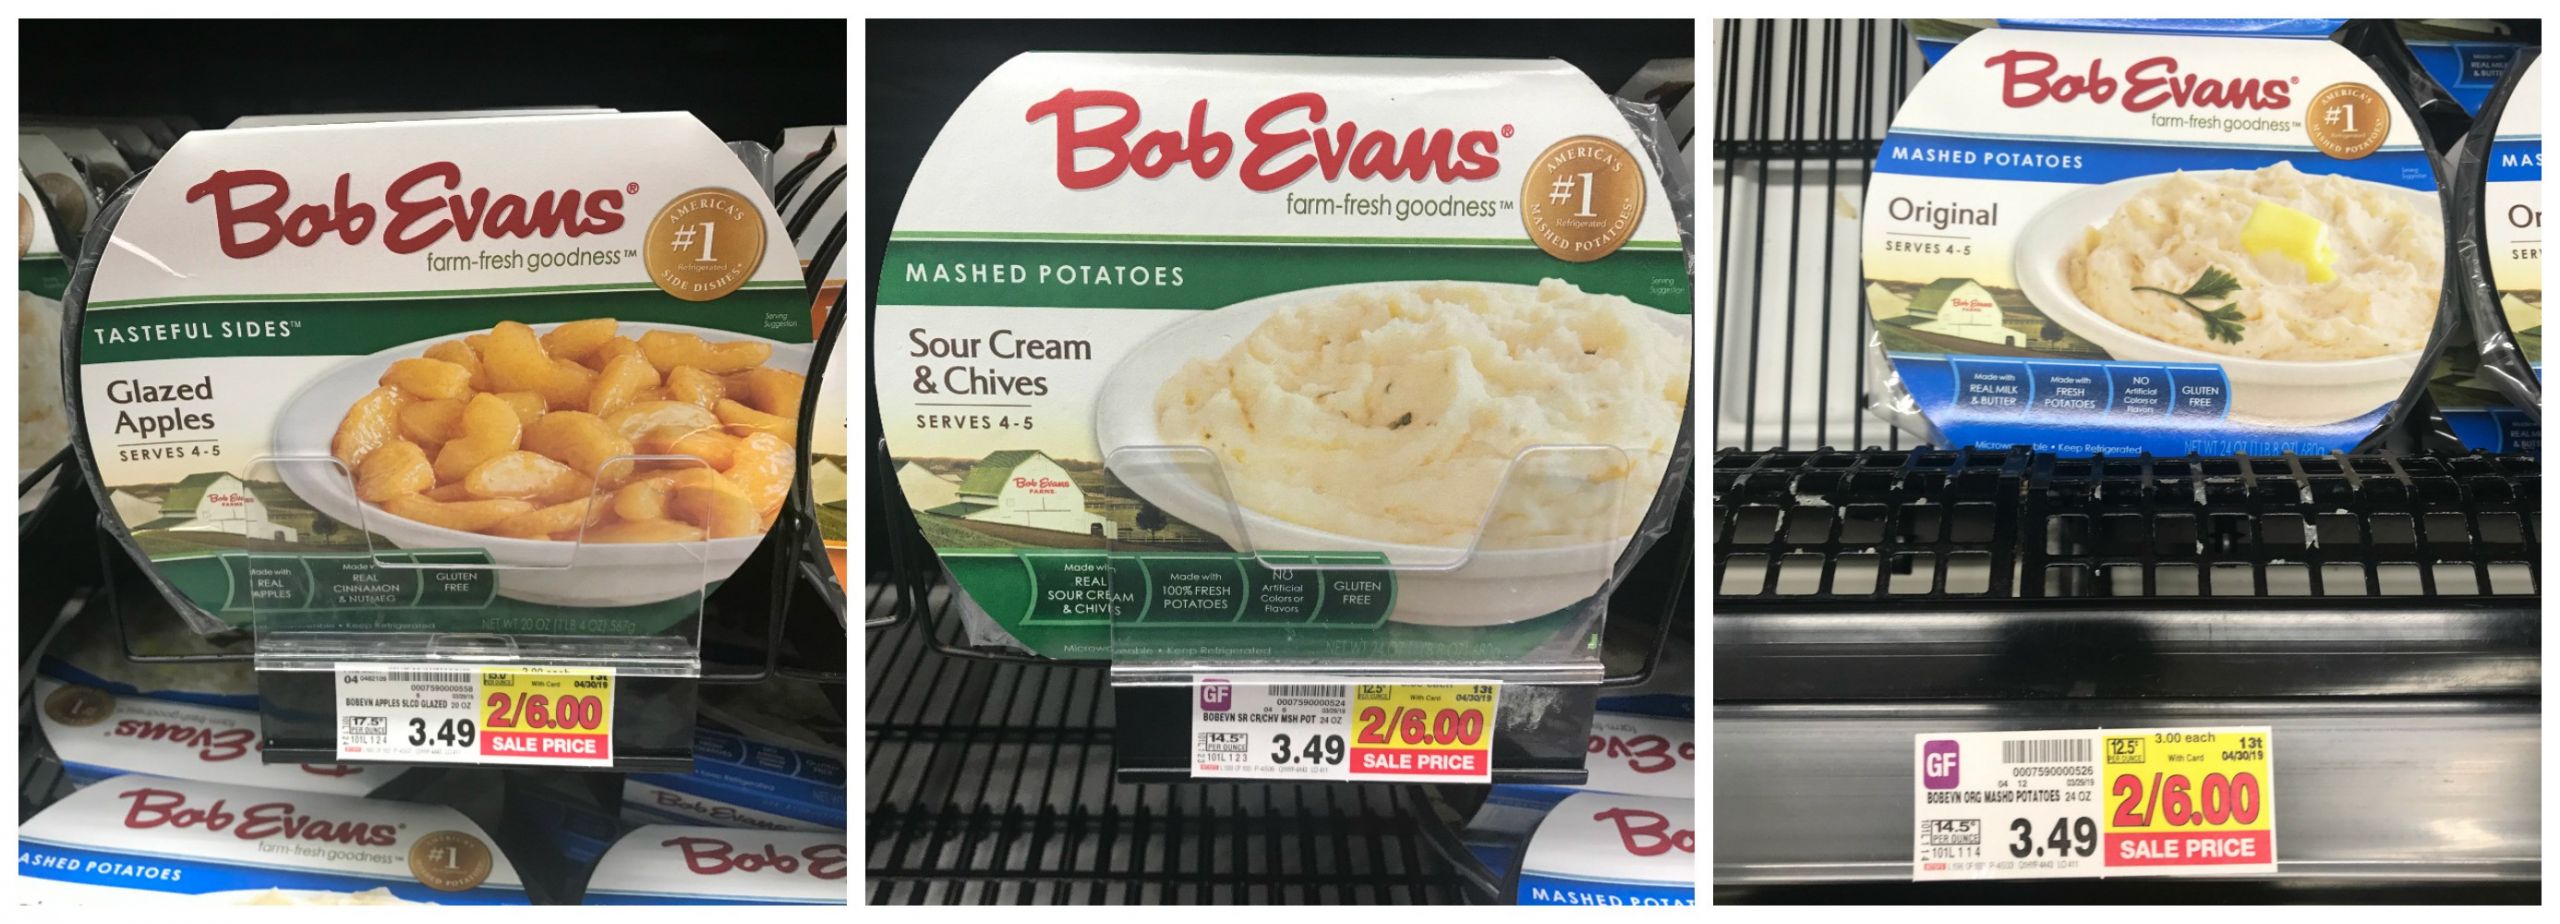 Bob Evans Refrigerated Side Dishes
 Grab Bob Evans Side Dishes For ly $2 50 each at Kroger